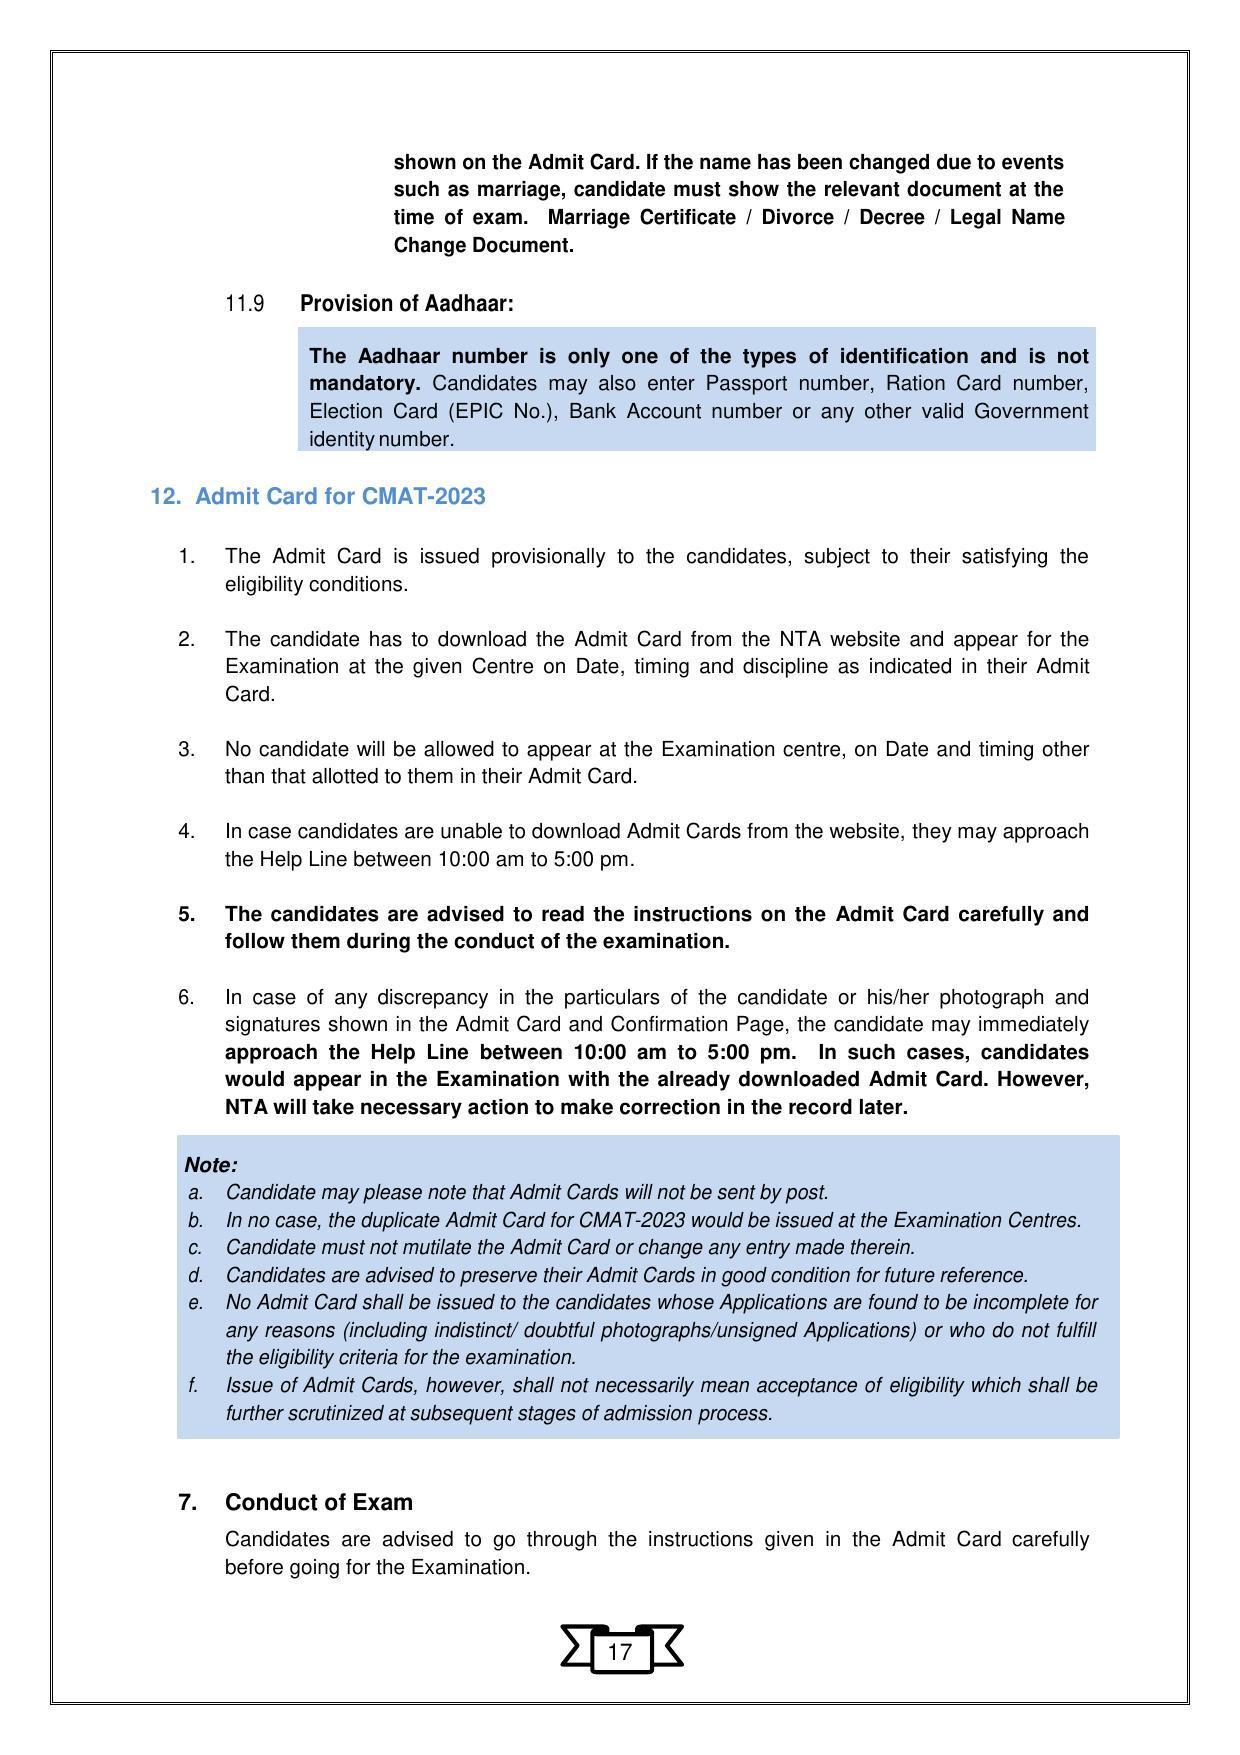 CMAT 2023 Information Bulletin - Page 20